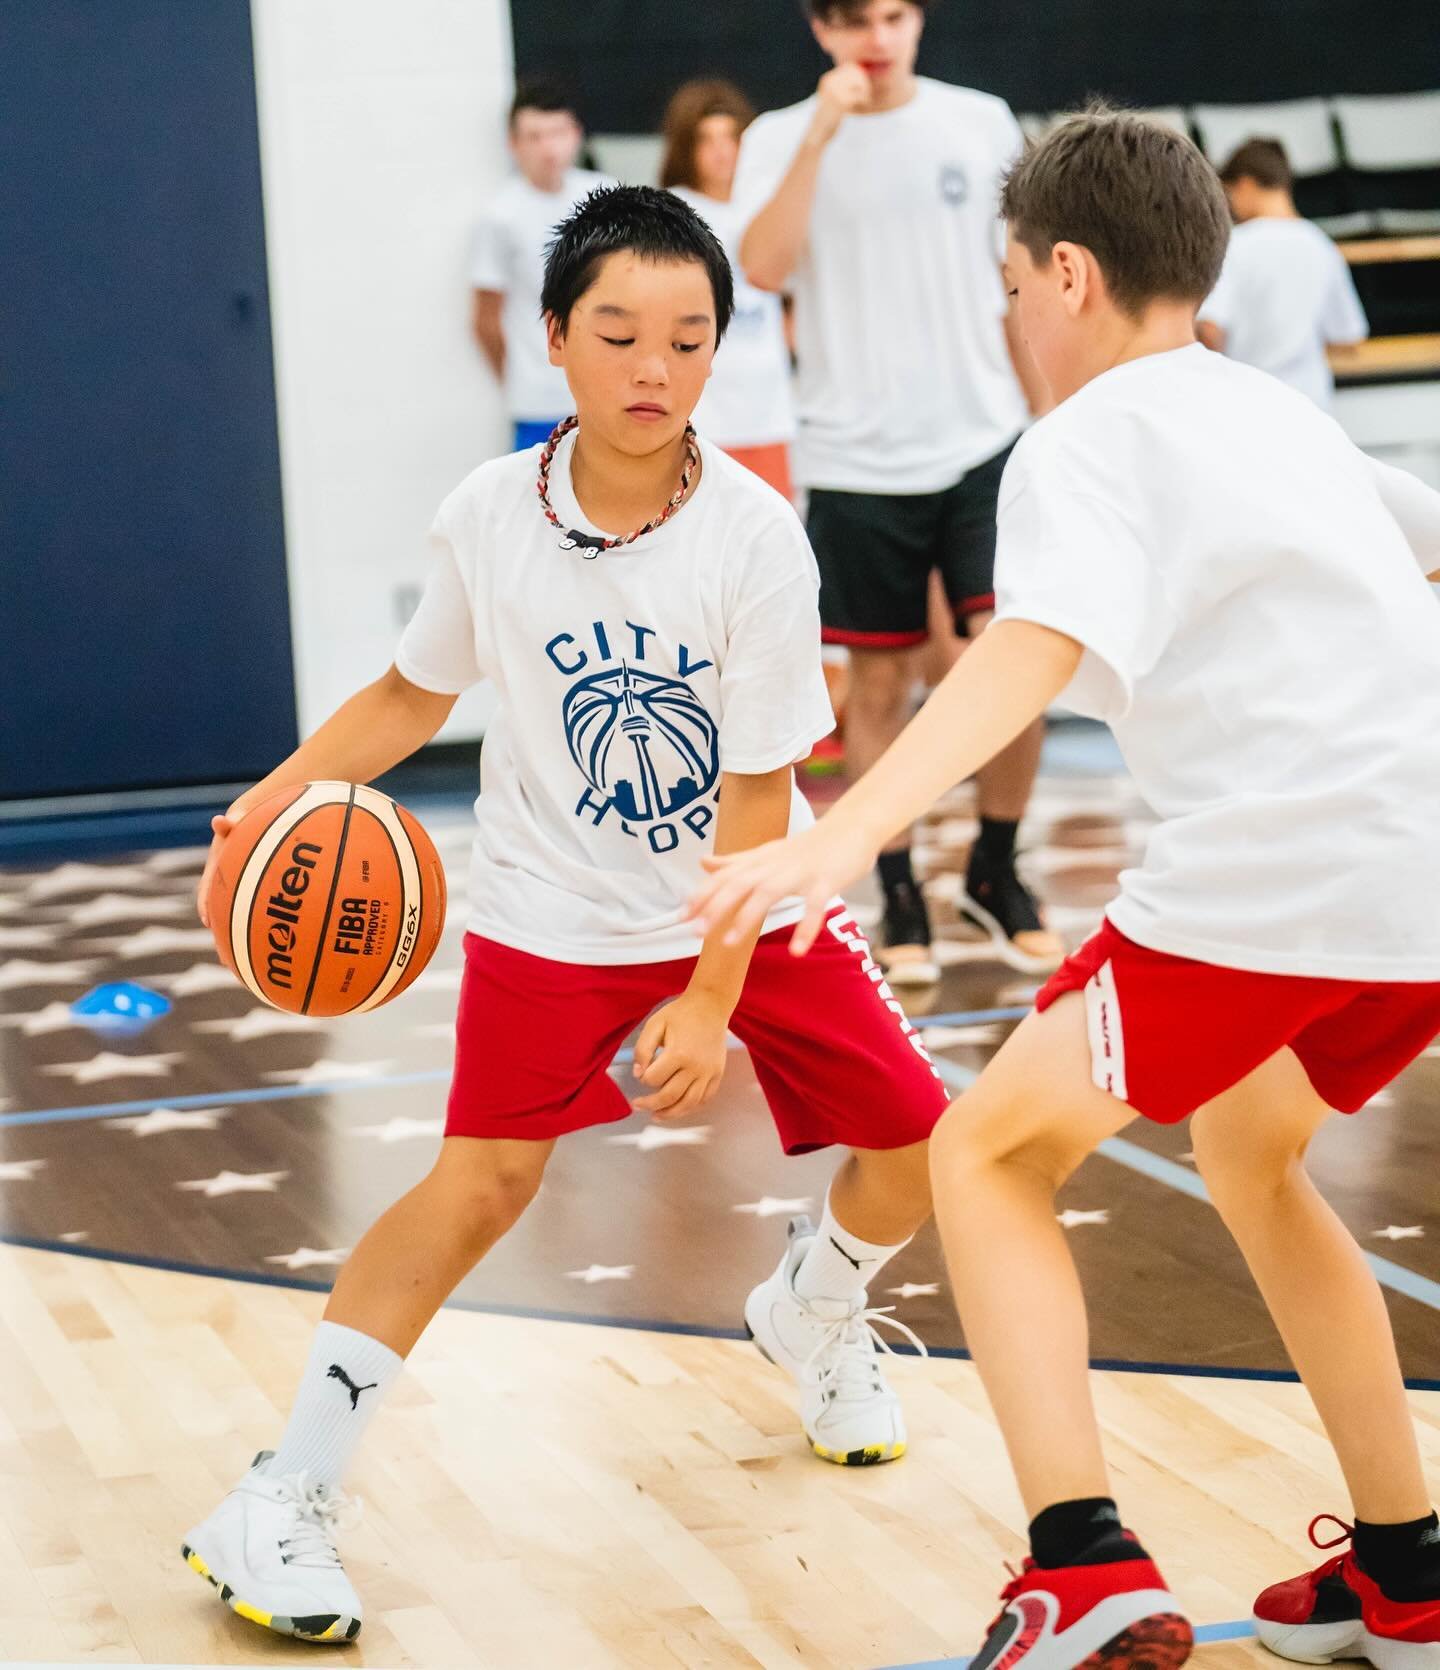 It&rsquo;s never too late to start playing. Our Grade 6-9 Hoops Sessions are for players of all levels.

Hoops Sessions teach players the fundamentals through drills &amp; skills and help apply the skills learned into a game. 

Whether you are a begi